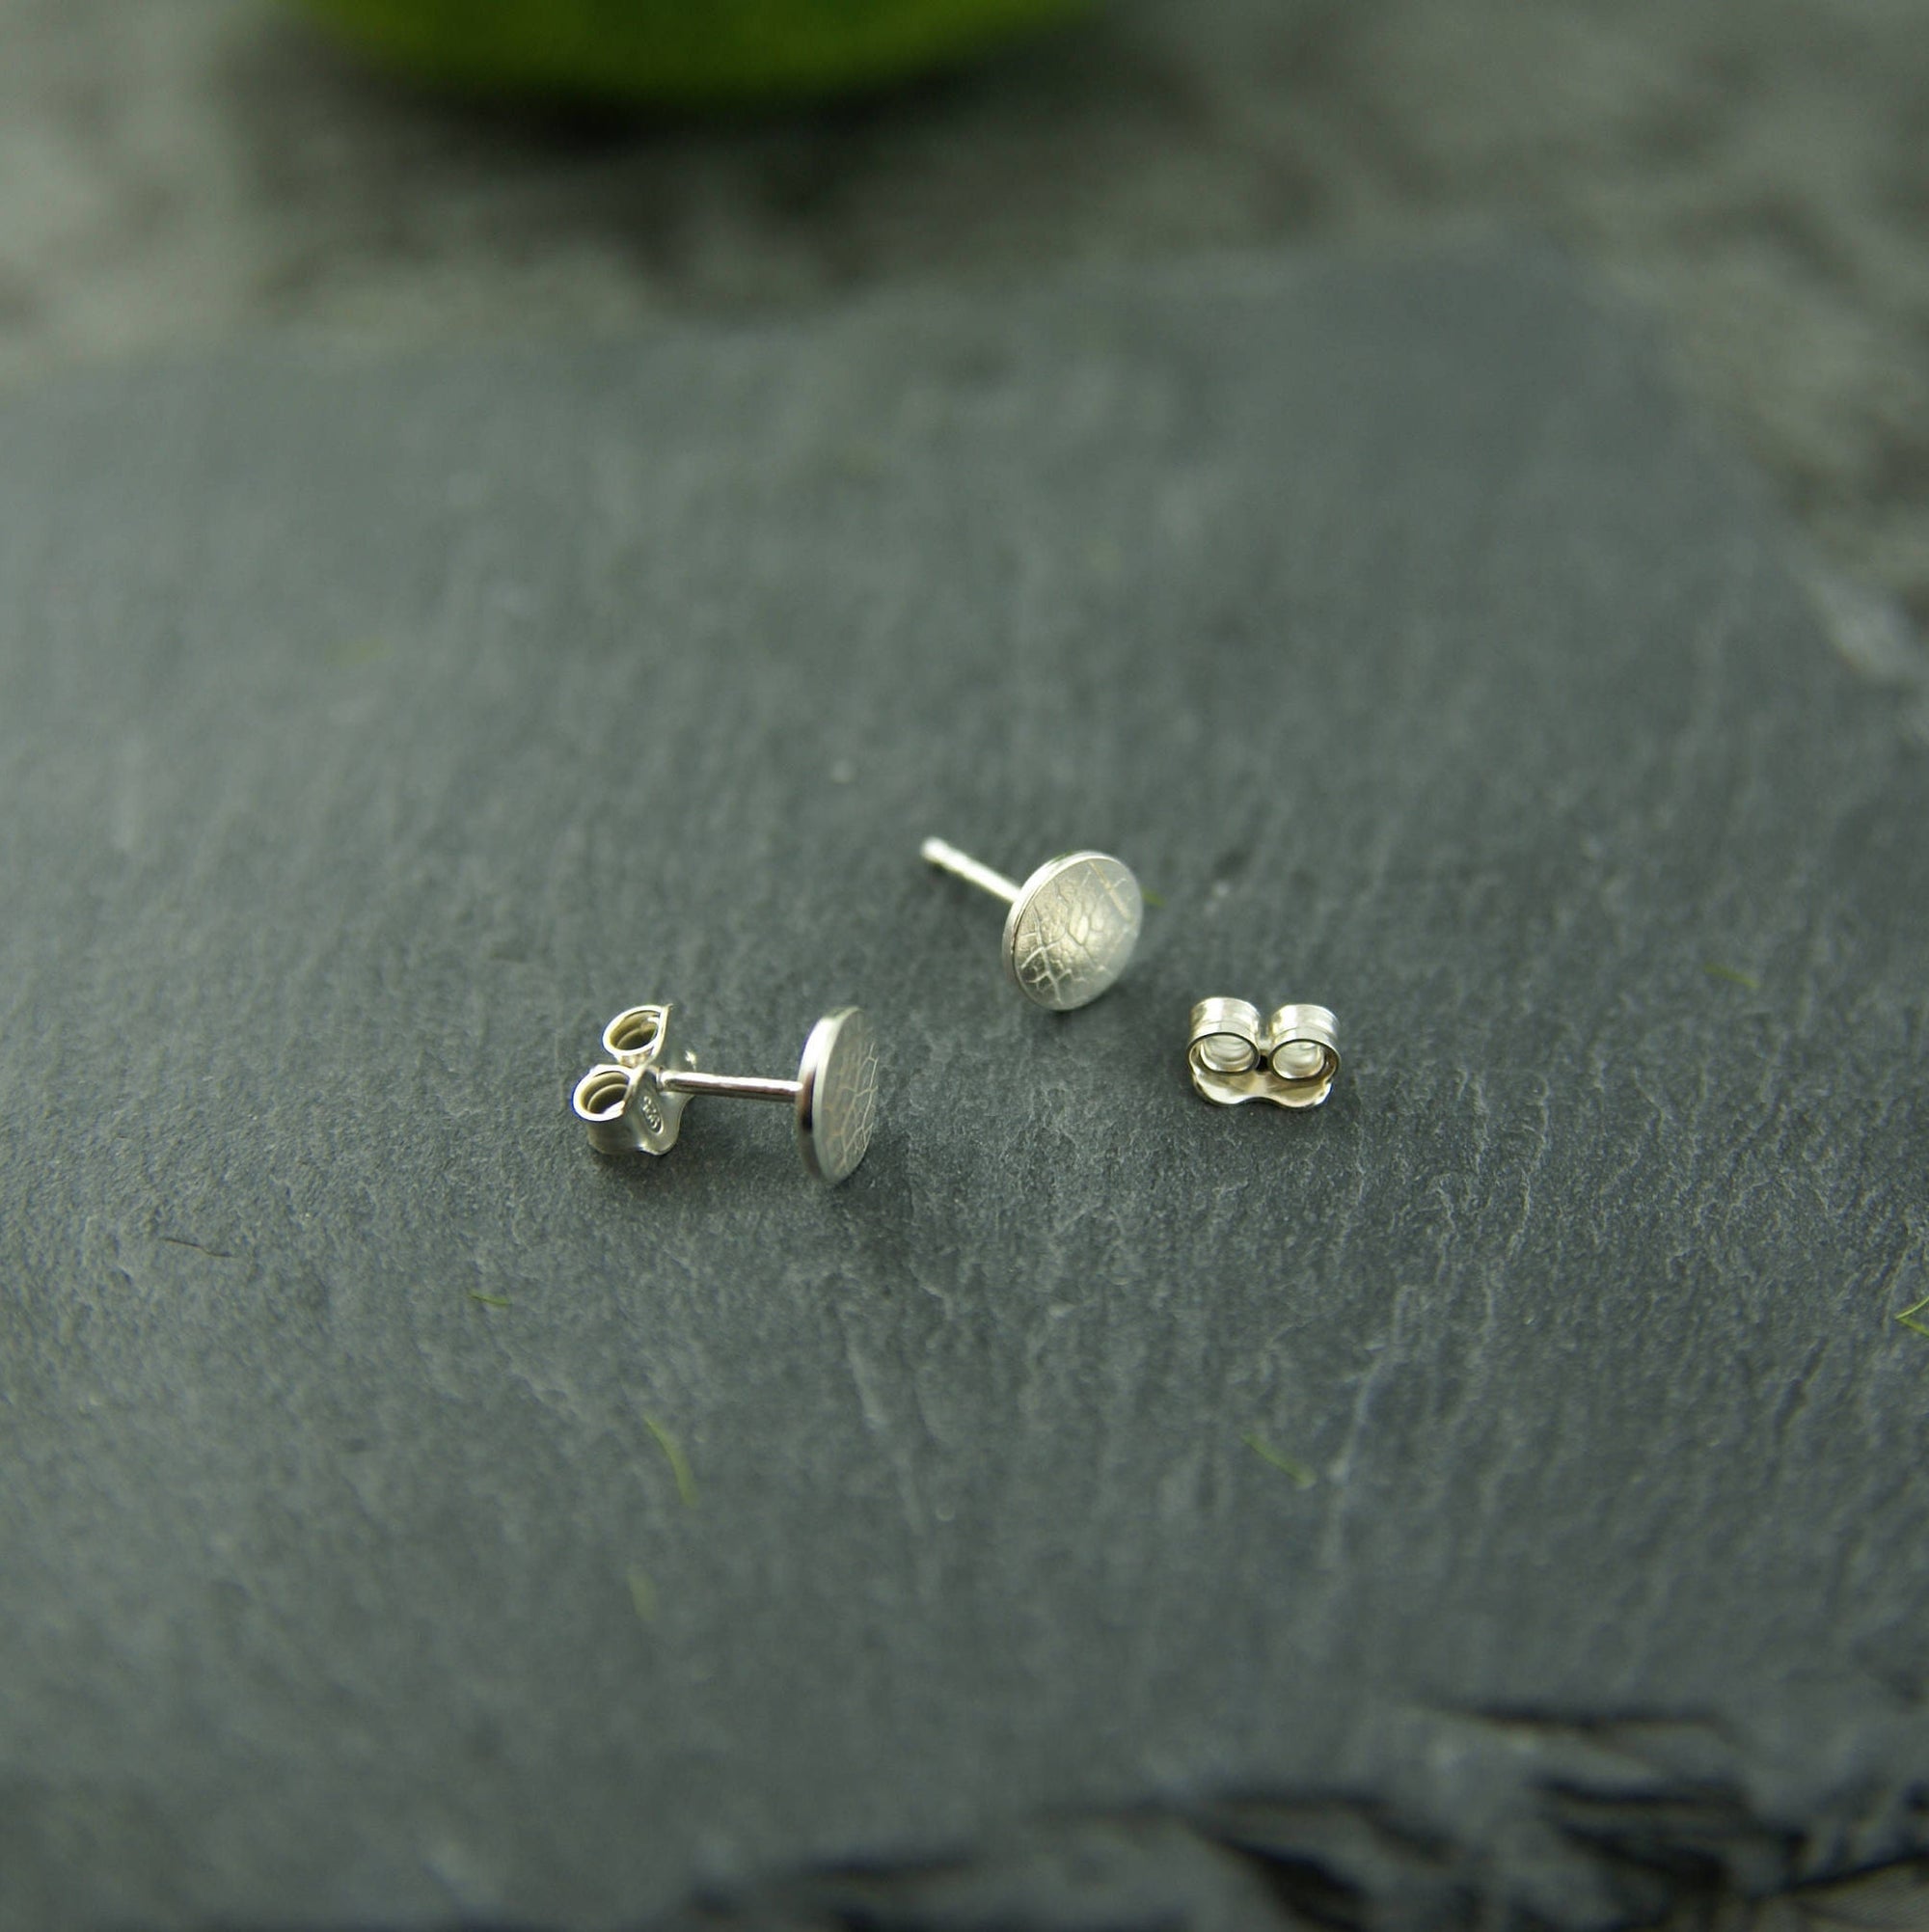 Small round earrings in sterling silver